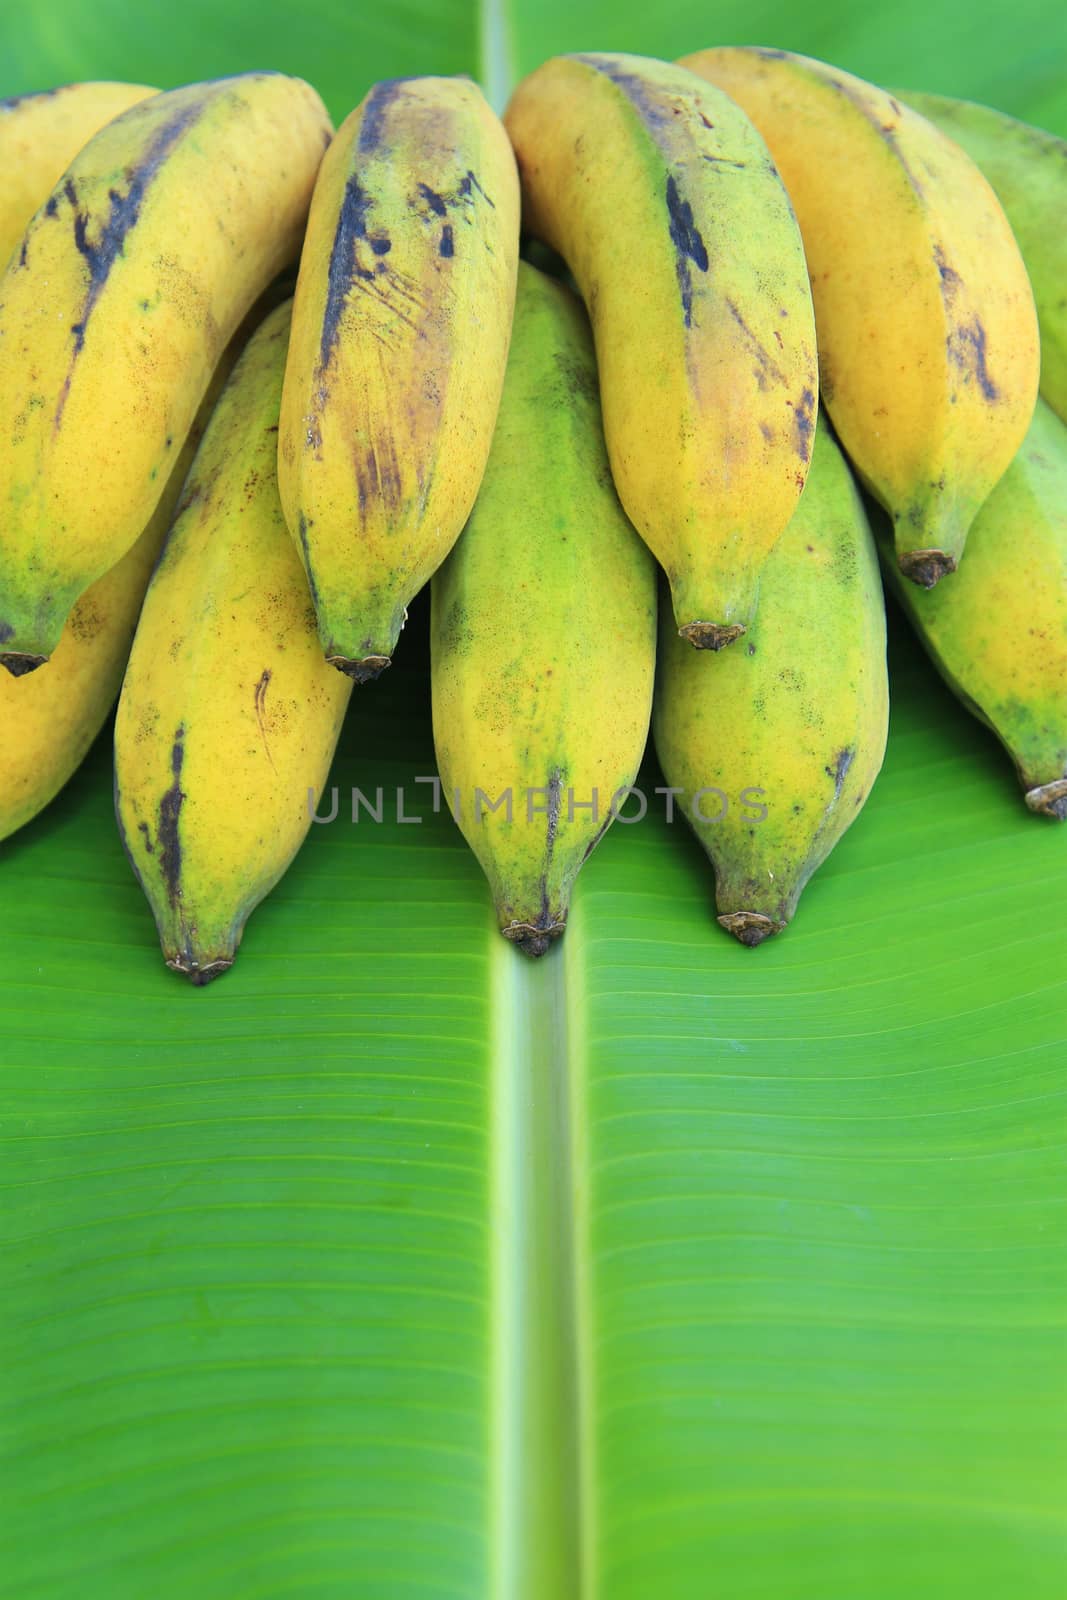 Bunch of bananas on banana leaves by foto76